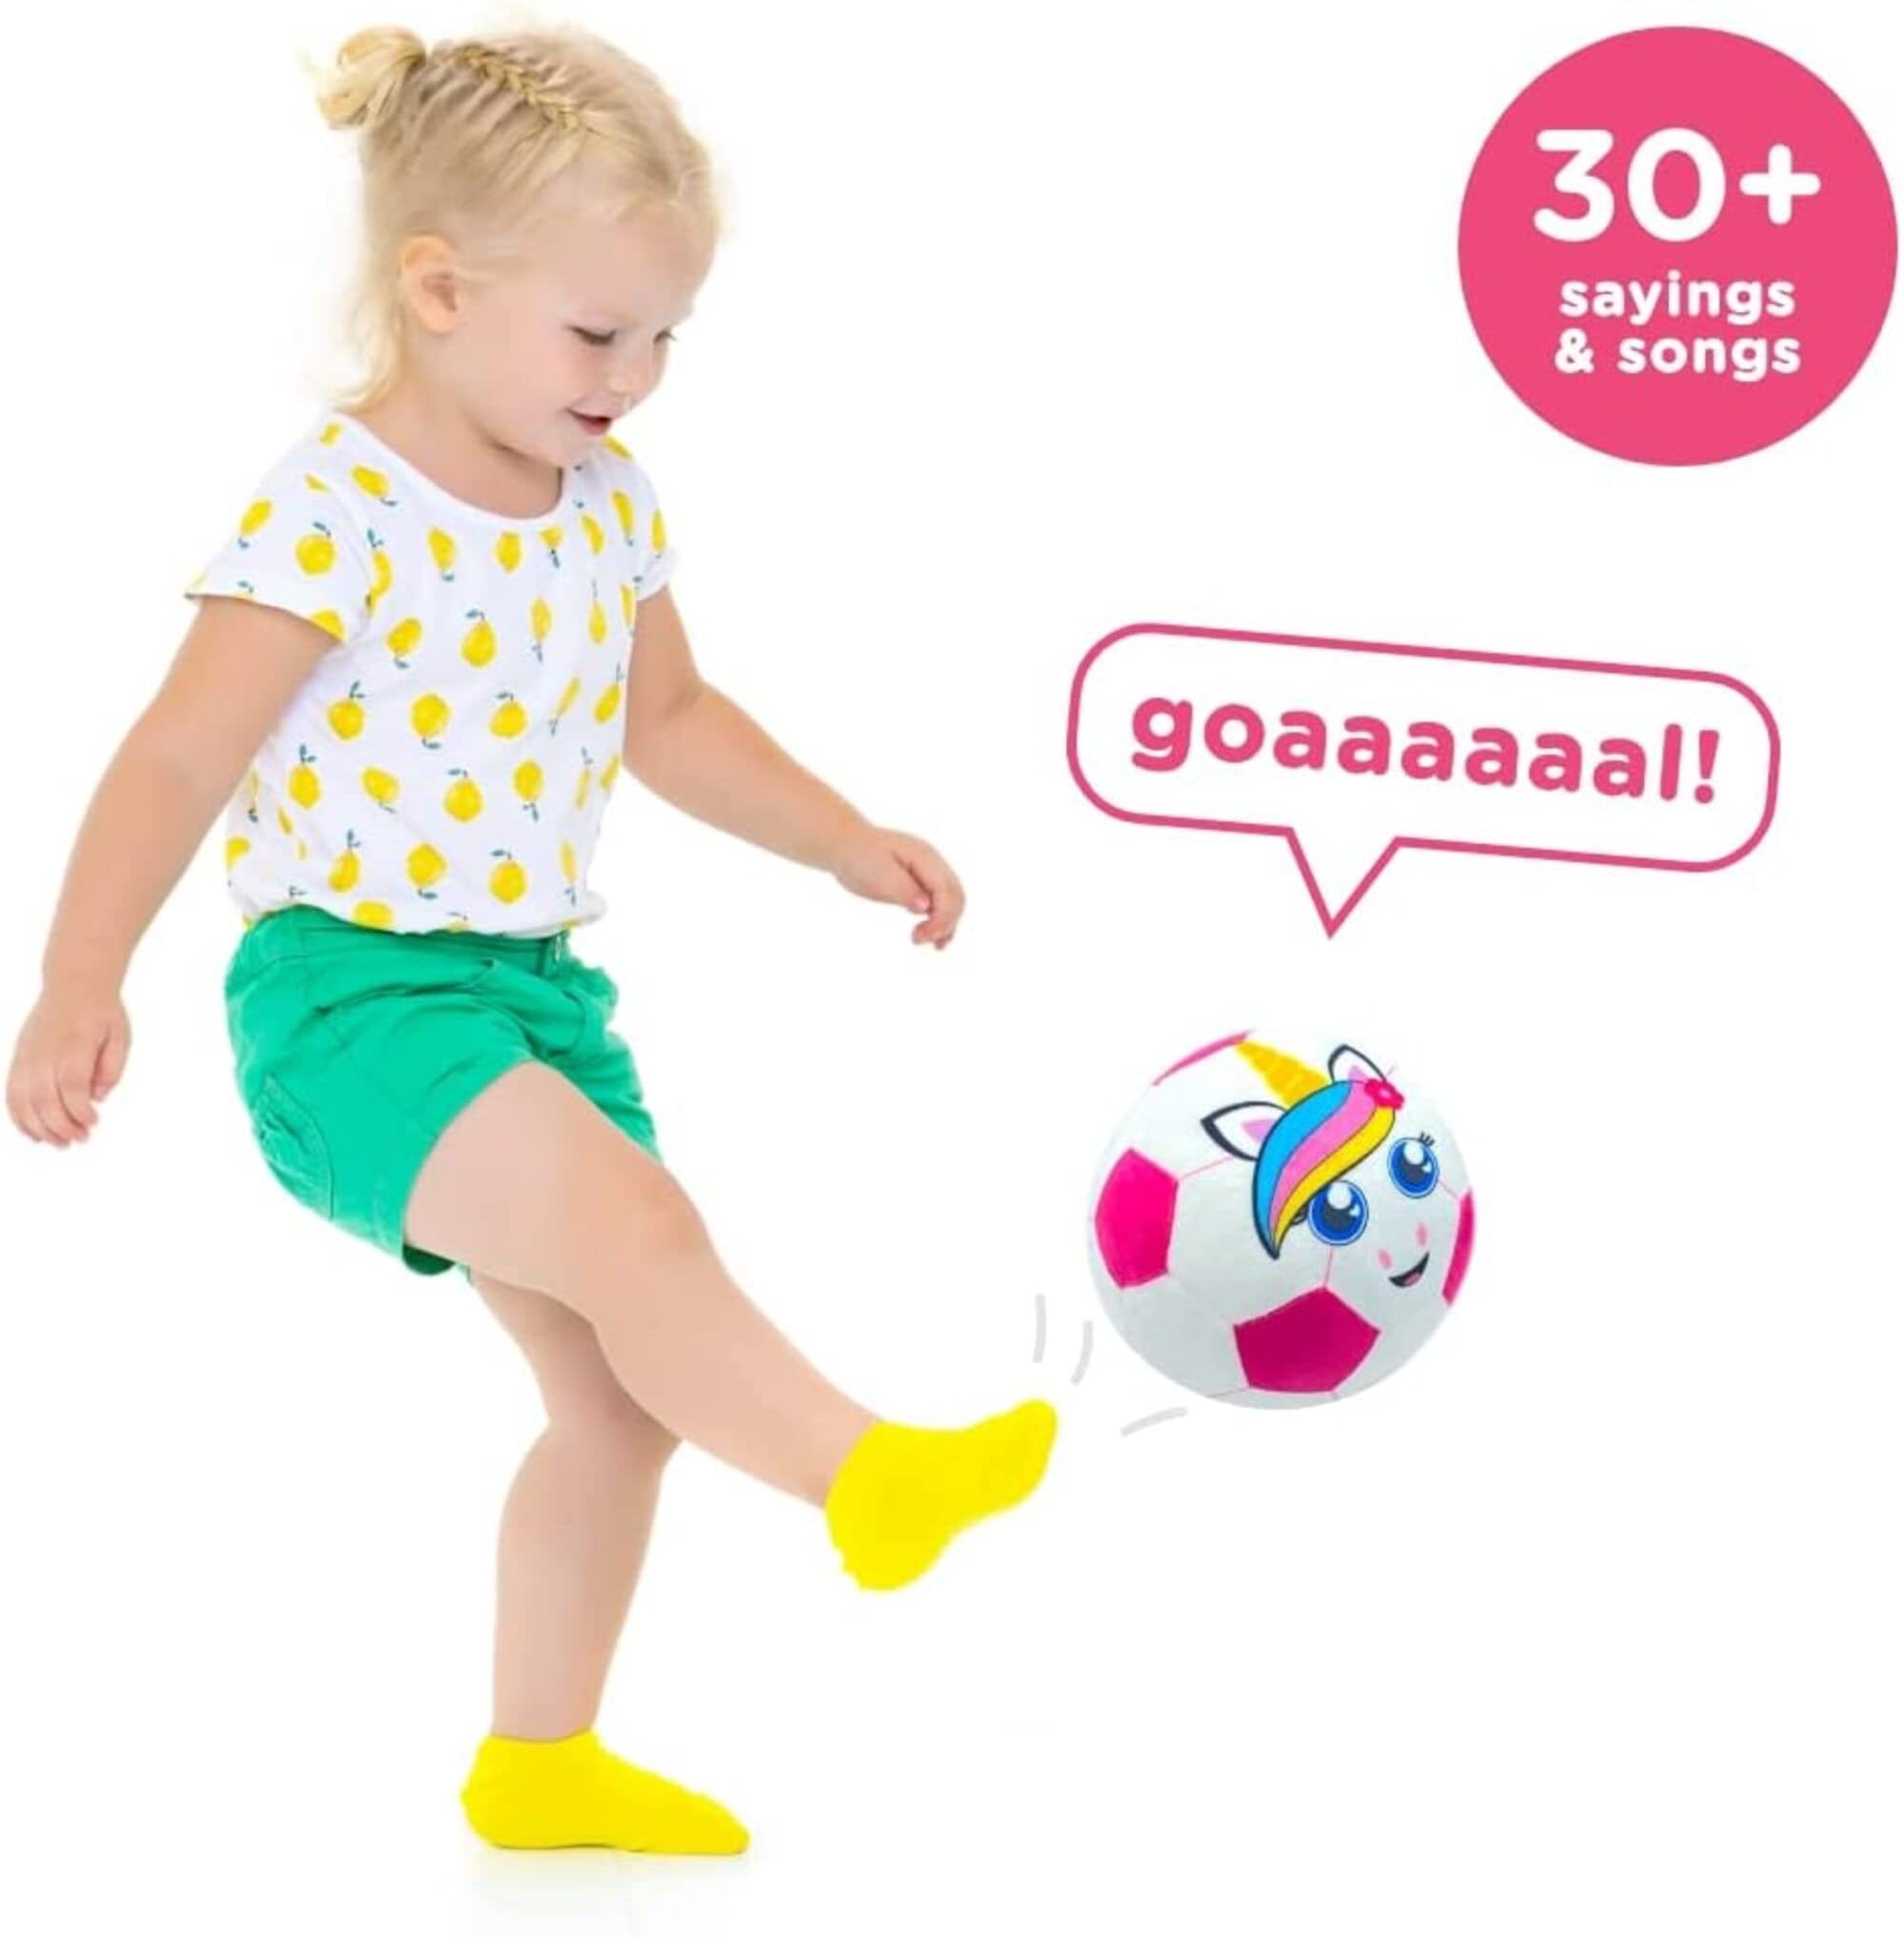 Move2Play, Hilariously Interactive Toy Soccer Ball with Music and Sound Effects, Ball for Toddlers, Birthday Gift for Boys and Girls 1, 2, 3+ Years Old